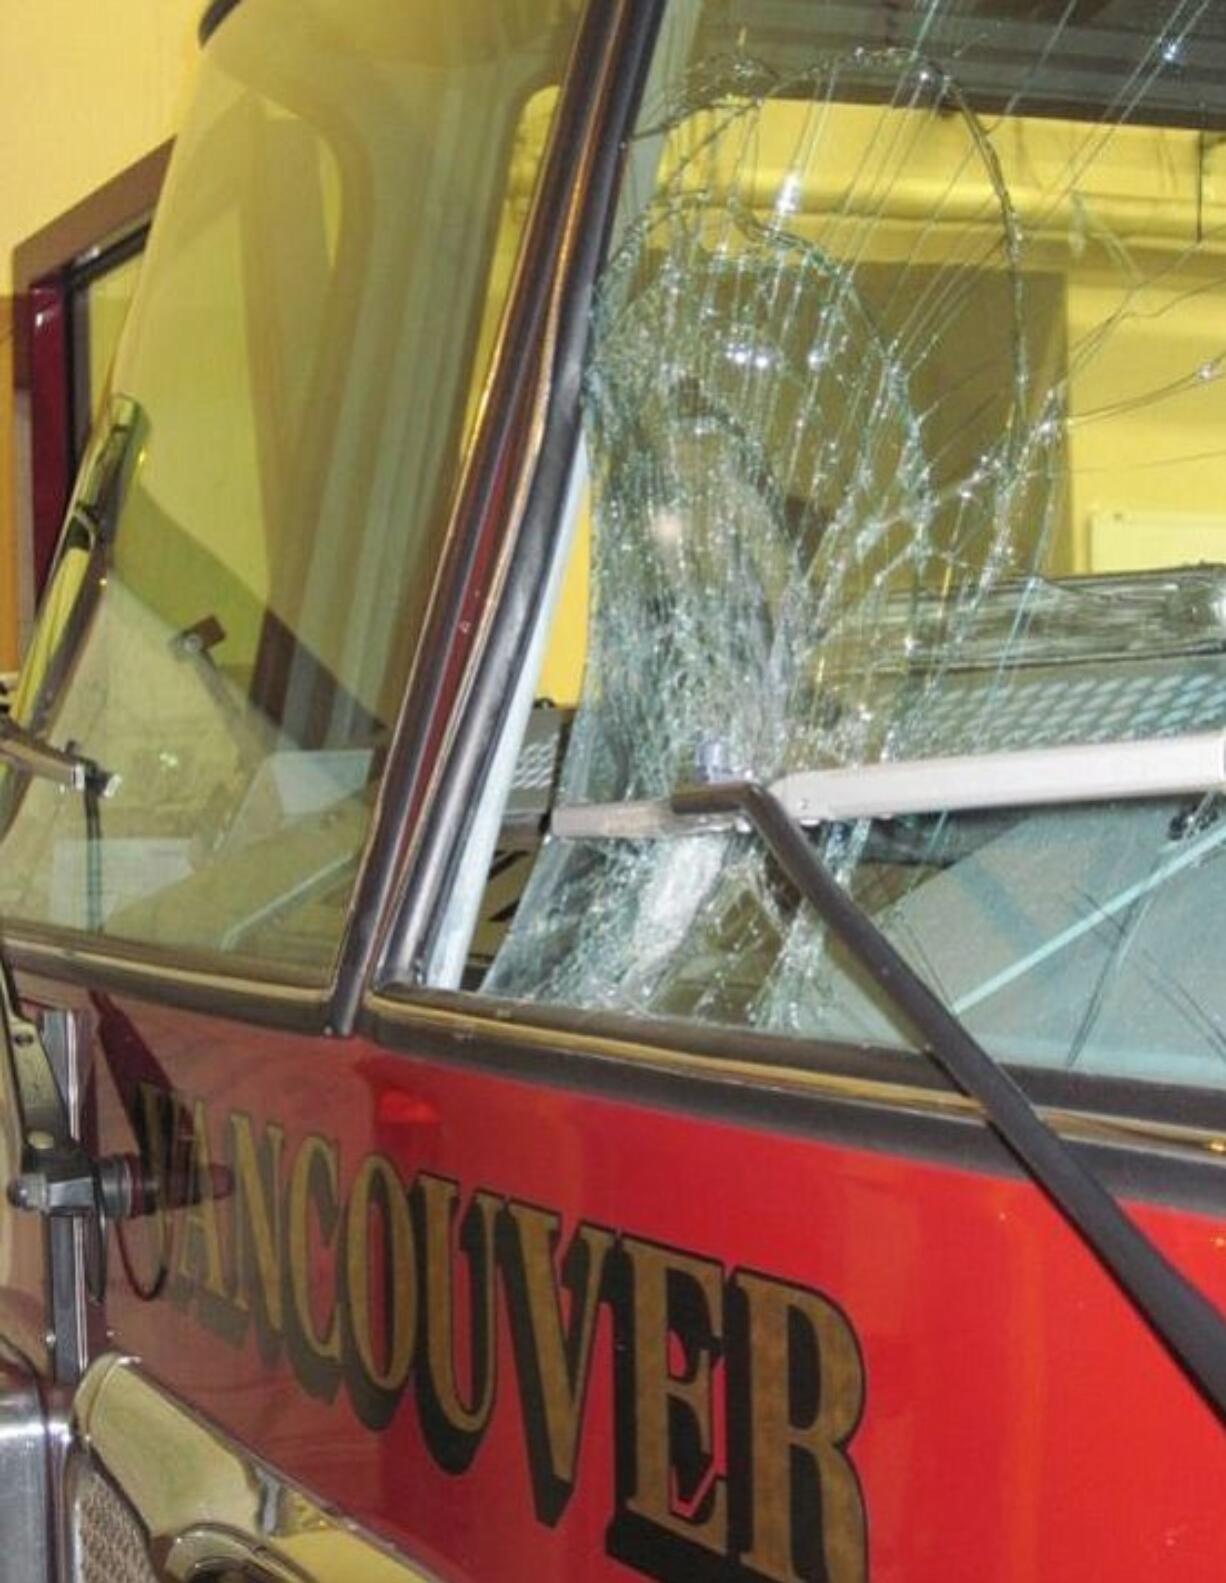 Shane Parker/Vancouver Fire Department
A large rock caved in part of the windshield of one of the Vancouver Fire Department's ladder trucks early Saturday.